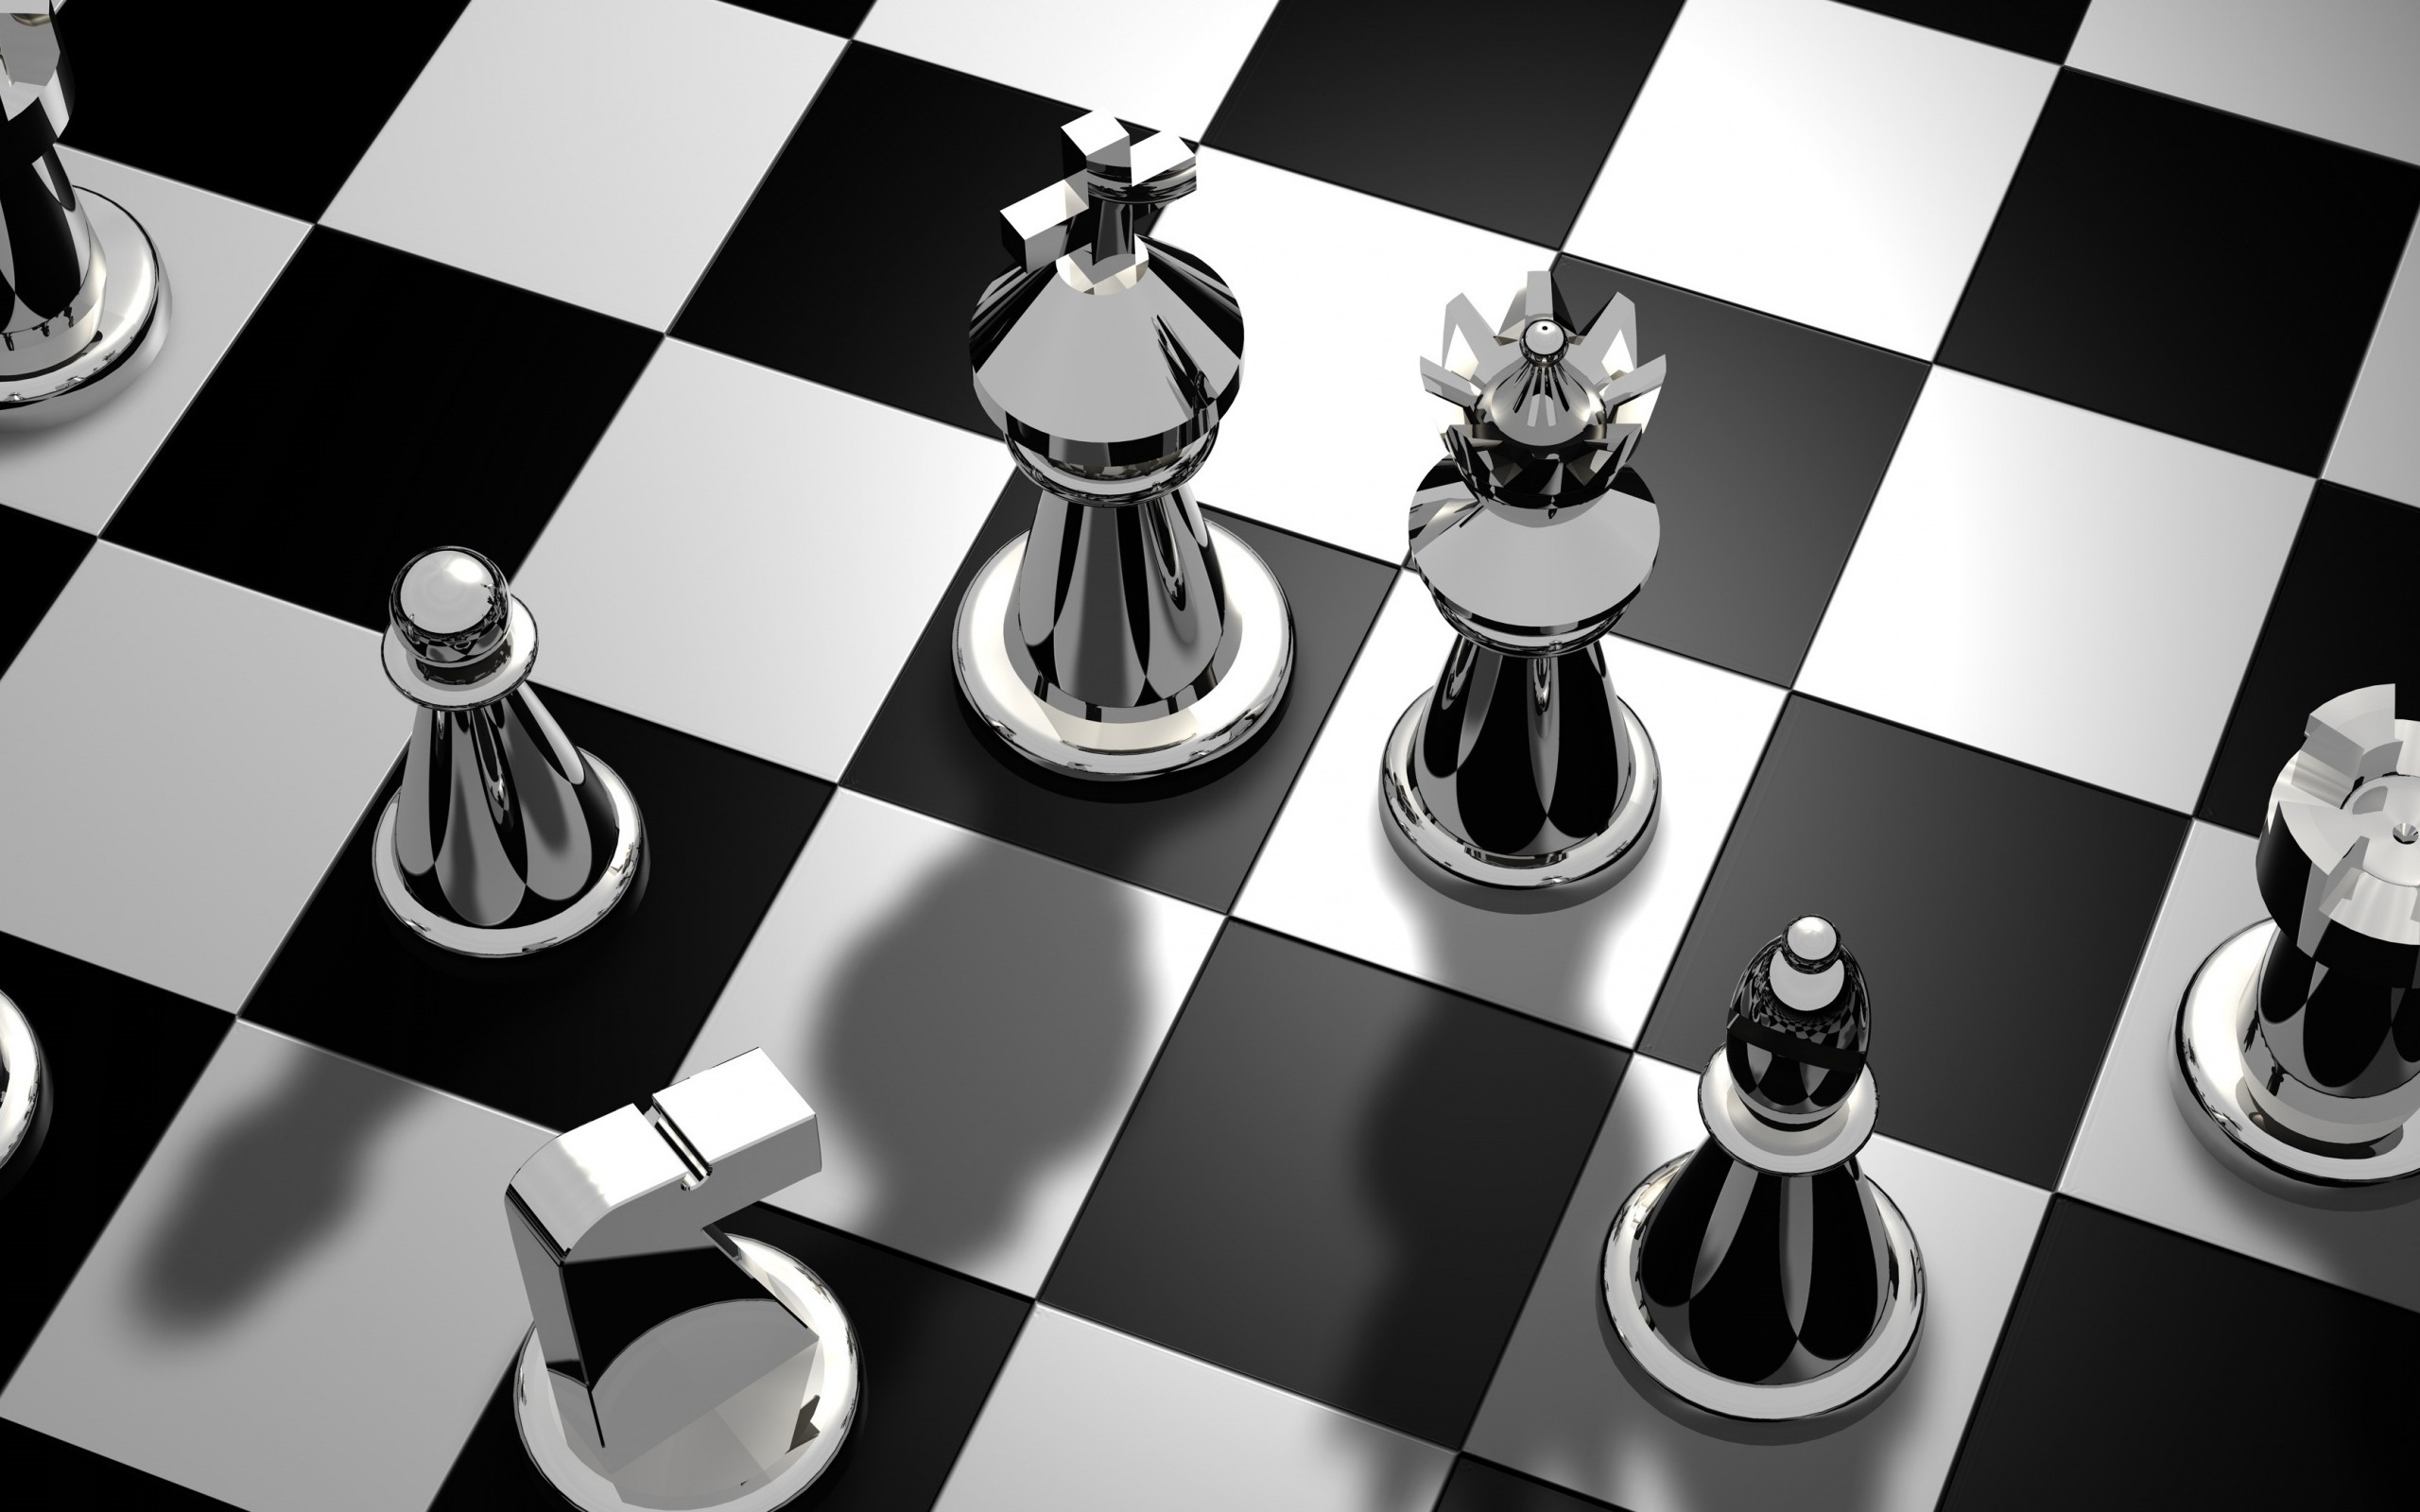 Chessboard, 3d Metal Chess, Chess Pieces, Black And - Chess Pieces - HD Wallpaper 